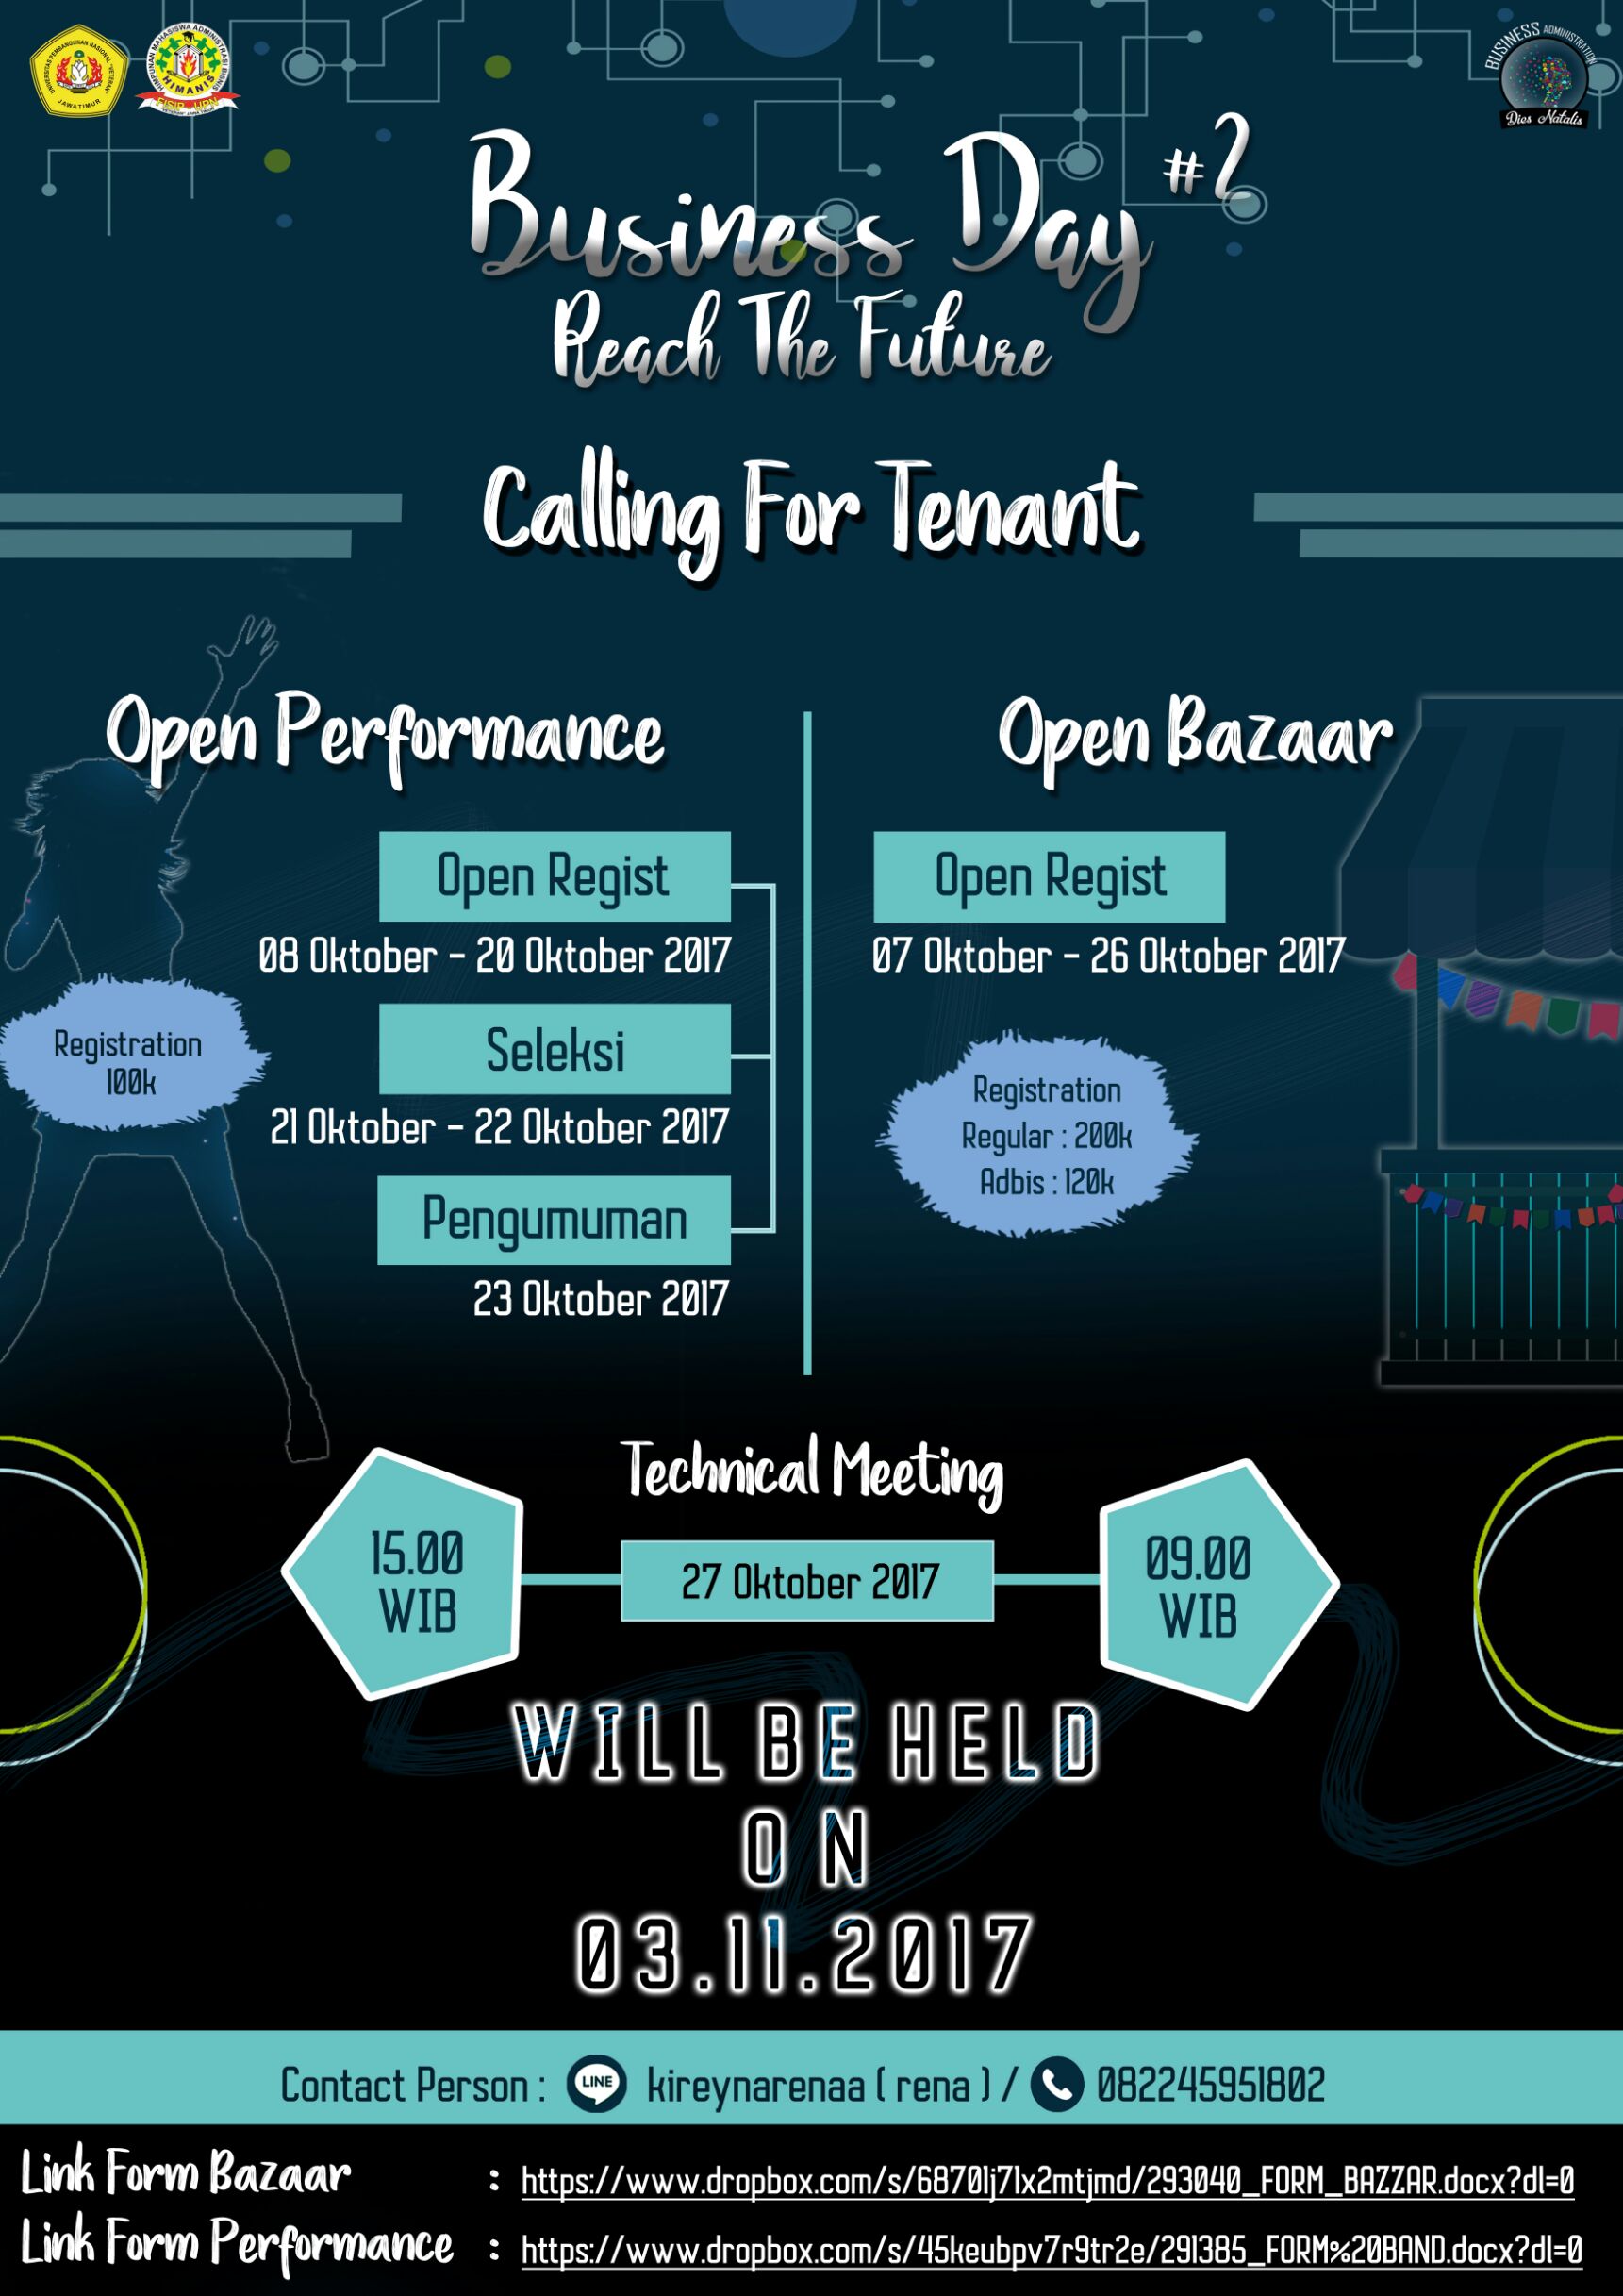 Poster Calling For Tenant! Business Day #2 Reach The Future